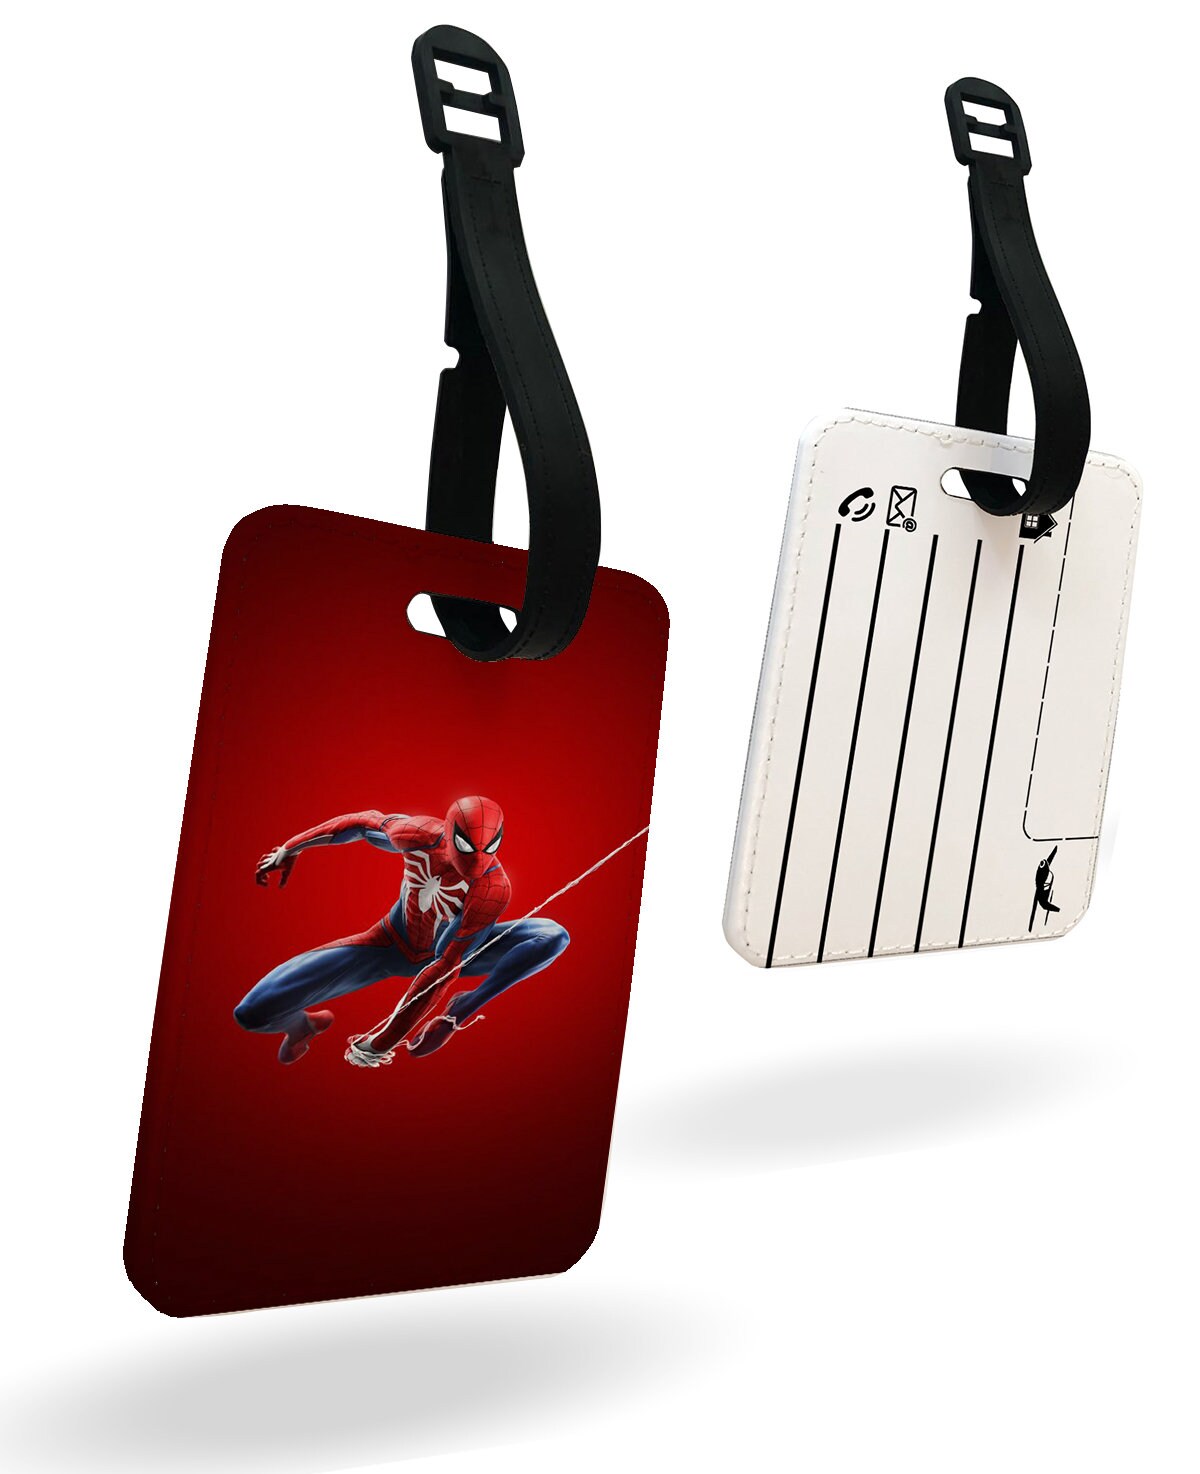 Personalised Faux Leather Passport Cover and Luggage Tags, Travel Accessory Set, Marvel Avengers Amazing Spiderman